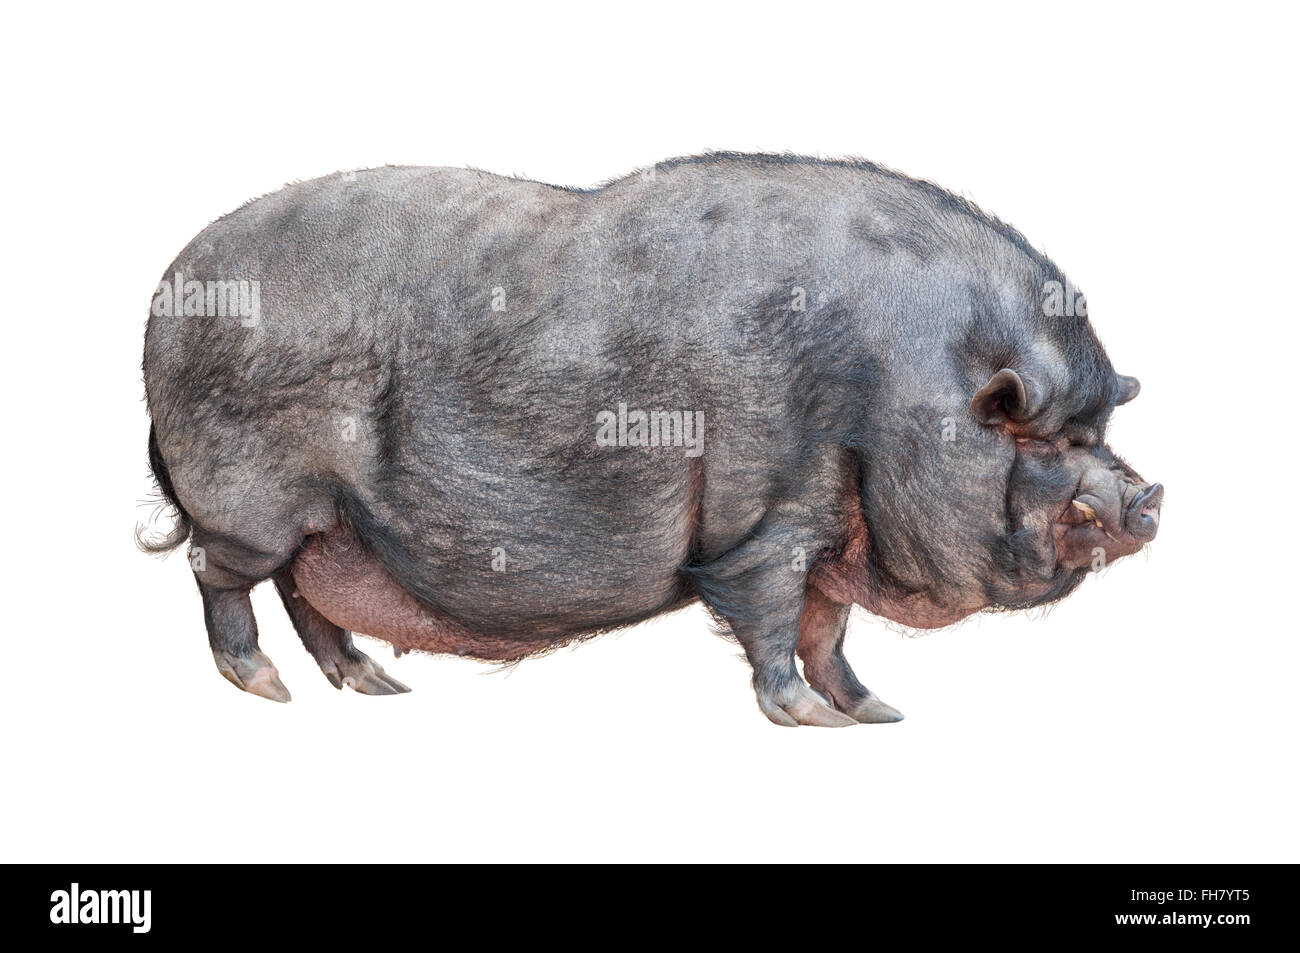 Vietnamese Pot-bellied pig isolated on white background Stock Photo